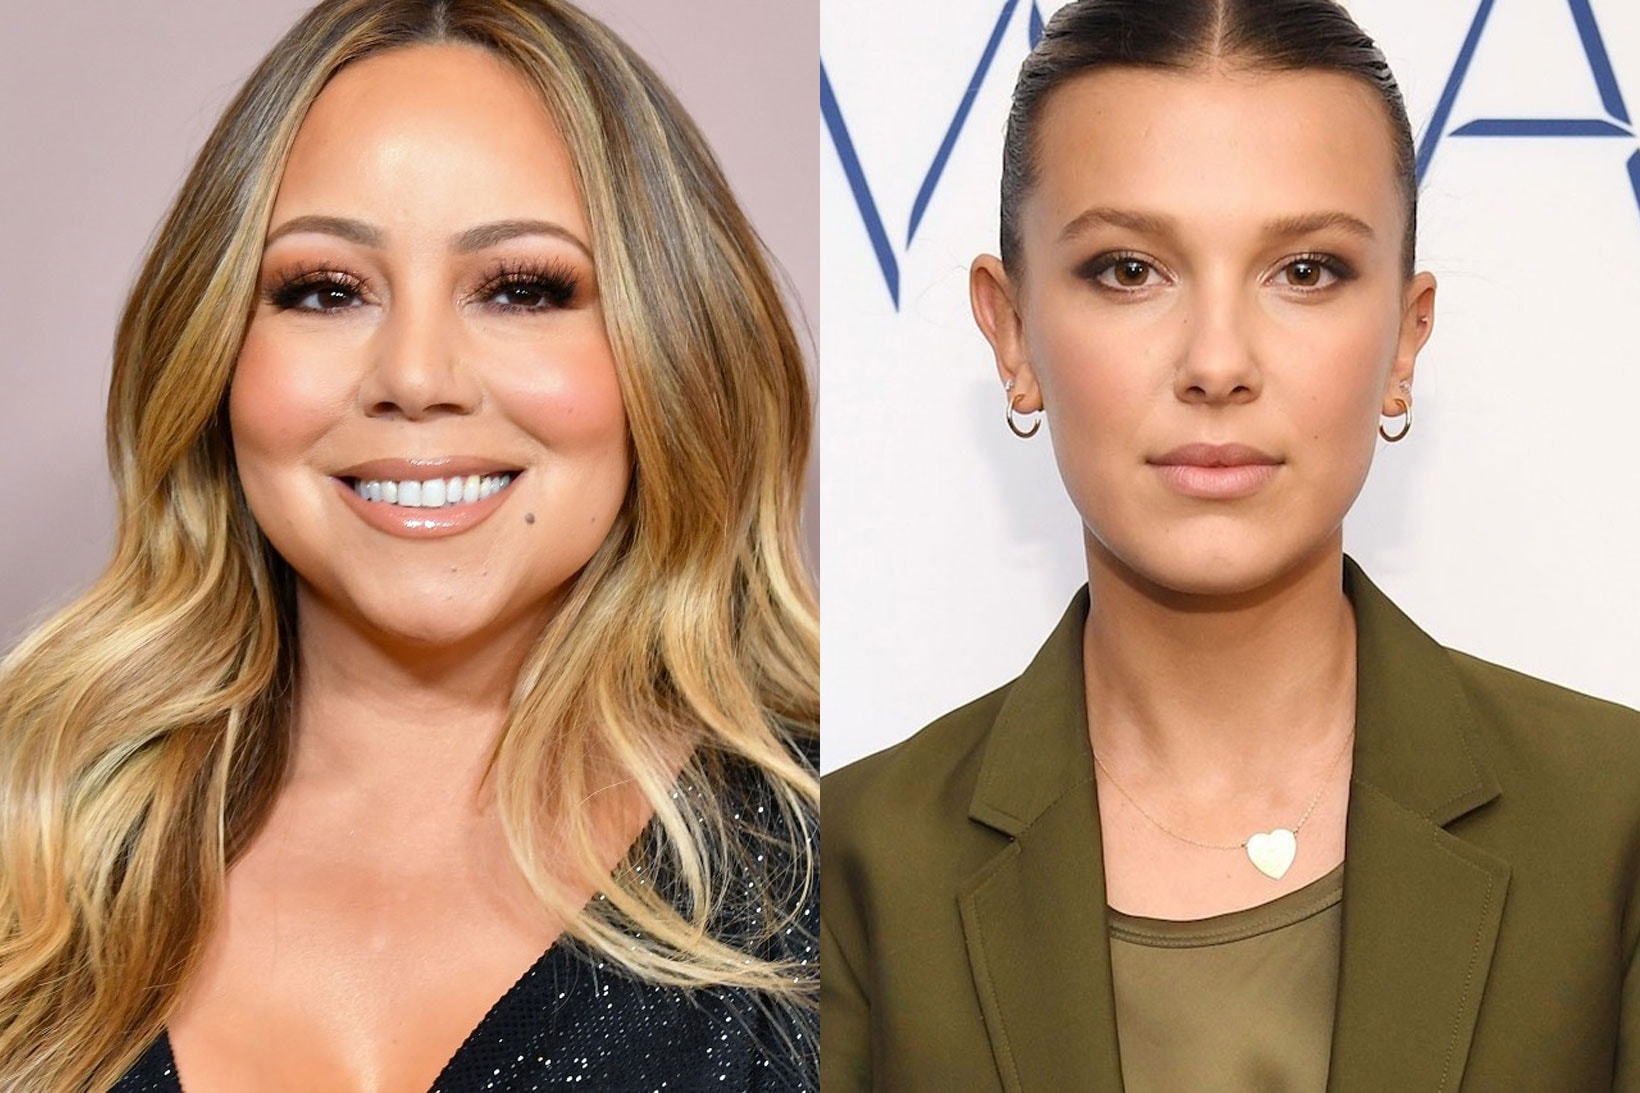 Mariah Carey Millie BObby Brown Collaboration Music secret Project Info